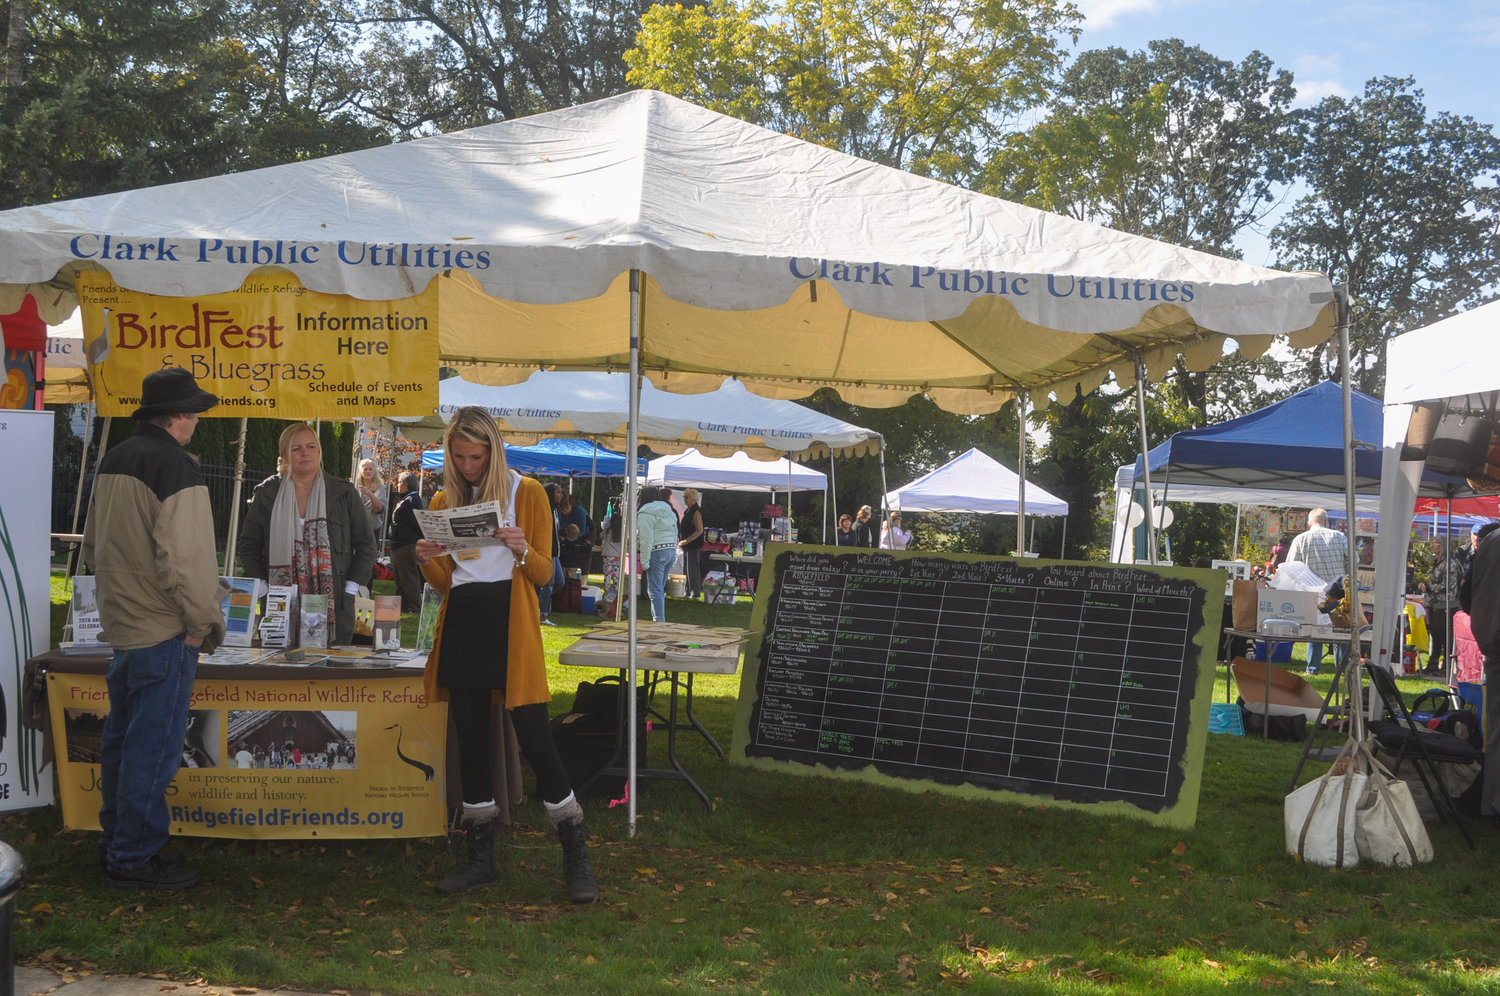 A booth for Clark Public Utilities sits at a previous BirdFest & Bluegrass Festival in Ridgefield.